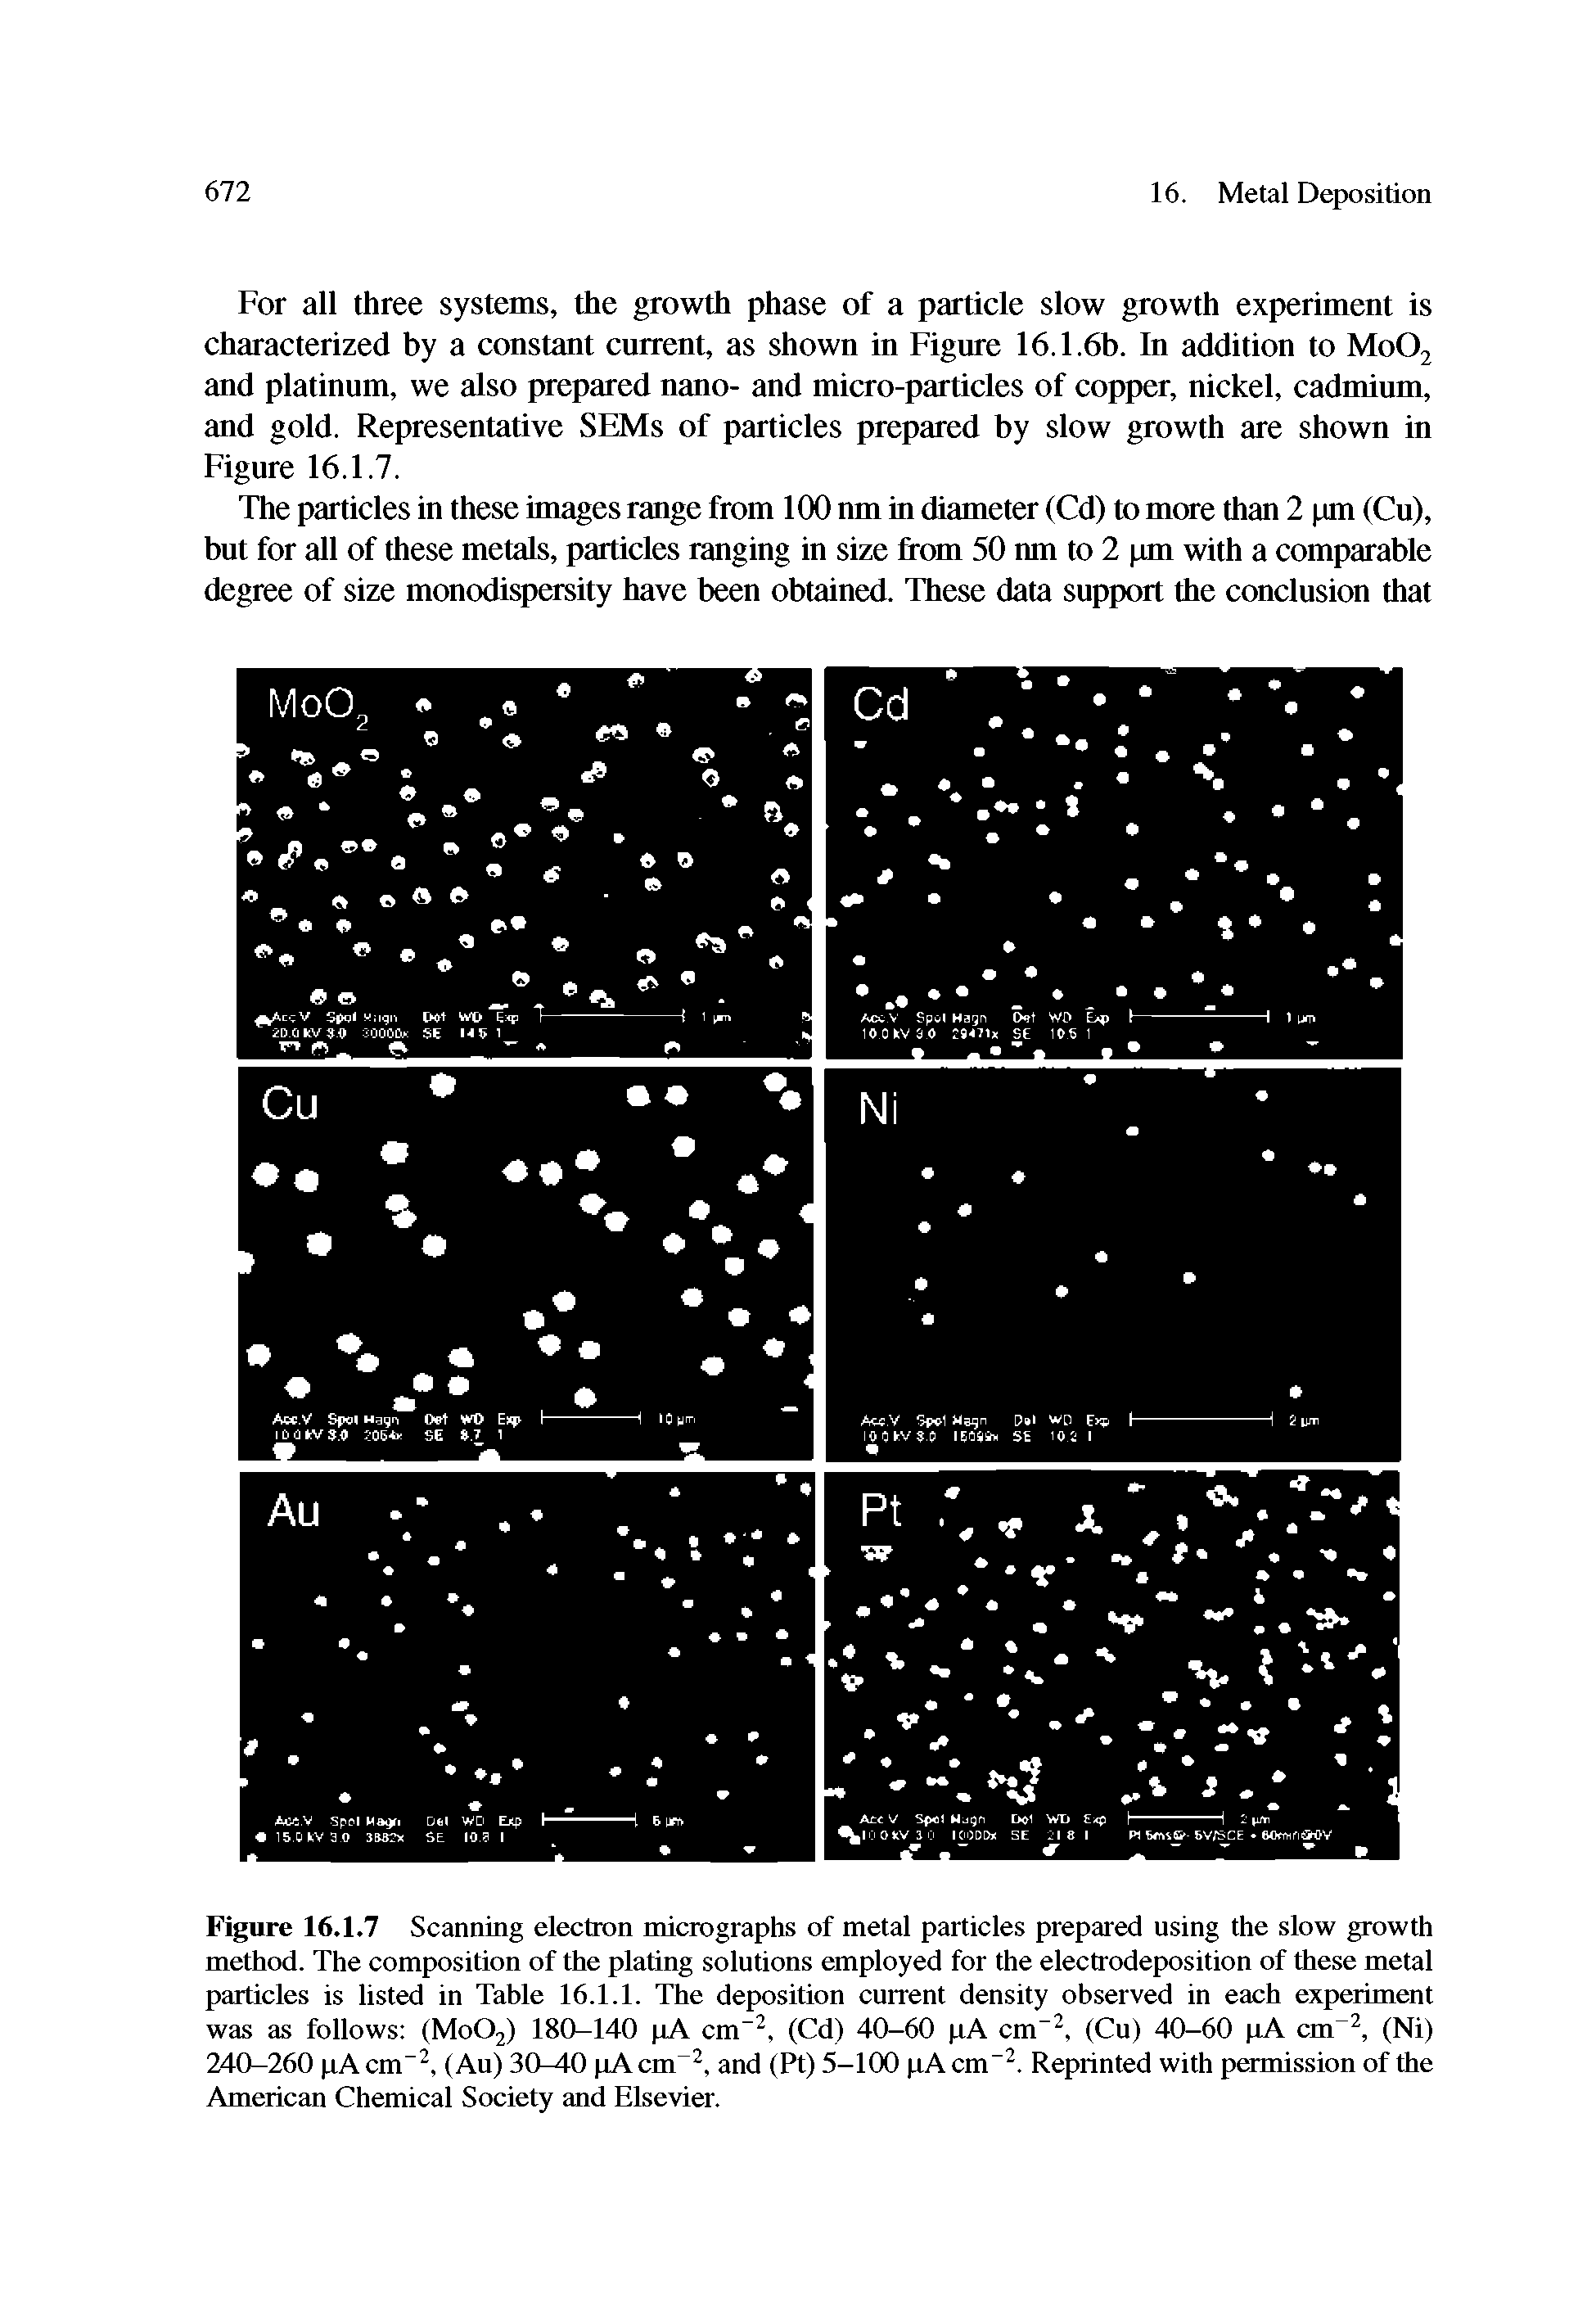 Figure 16.1.7 Scanning electron micrographs of metal particles prepared using the slow growth method. The composition of the plating solutions employed for the electrodeposition of these metal particles is listed in Table 16.1.1. The deposition current density observed in each experiment was as follows (MoOj) 180-140 pA cm , (Cd) 40-60 pA cm , (Cu) 40-60 pA cm , (Ni) 240-260 pAcm , (Au) 30-40 pAcm, and (Pt) 5-100 pAcm". Reprinted with permission of the American Chemical Society and Elsevier.